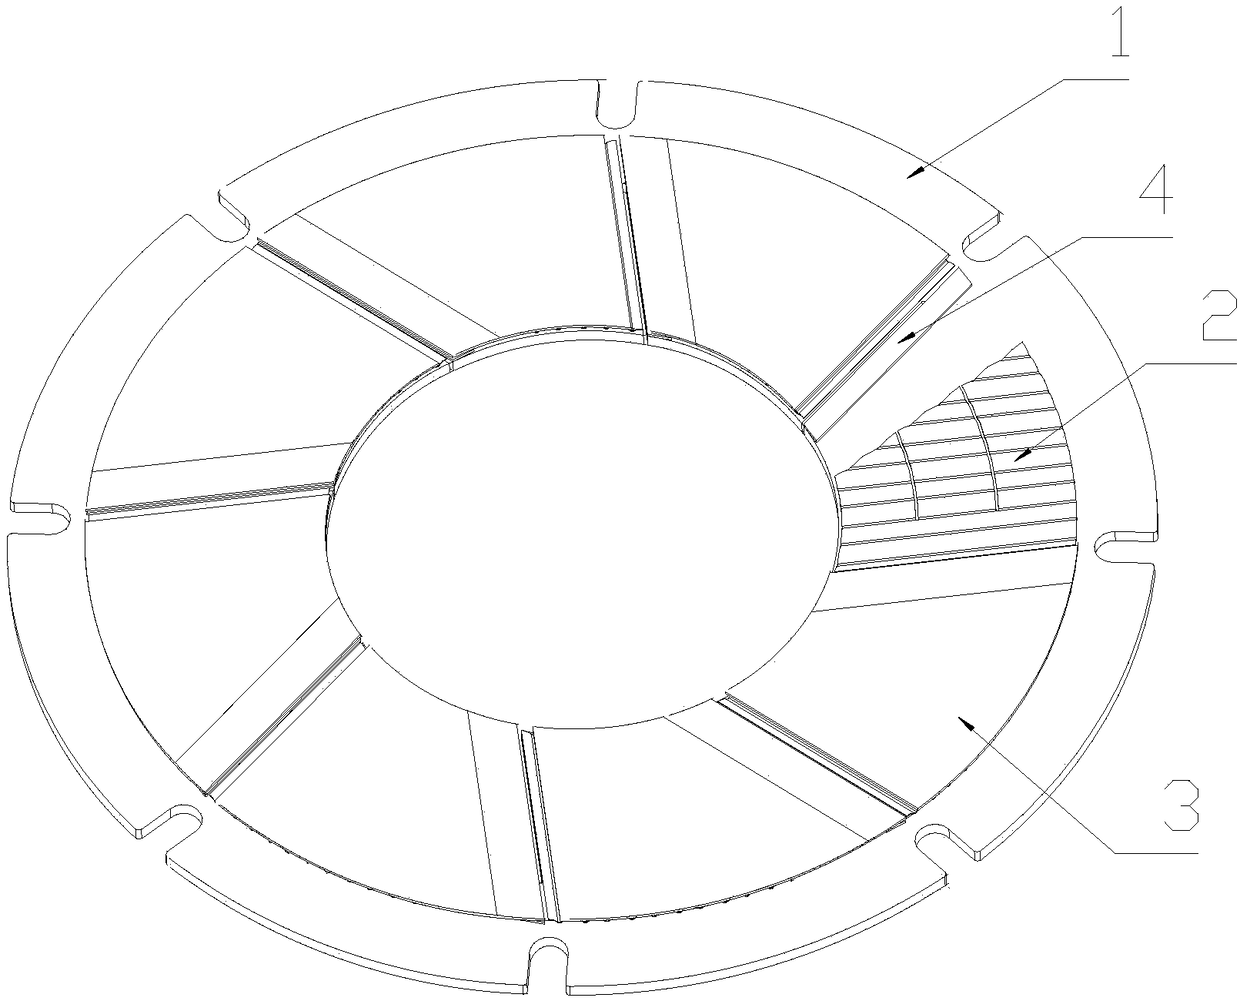 Thrust foil dynamic pressure air bearing with thick top foil structure